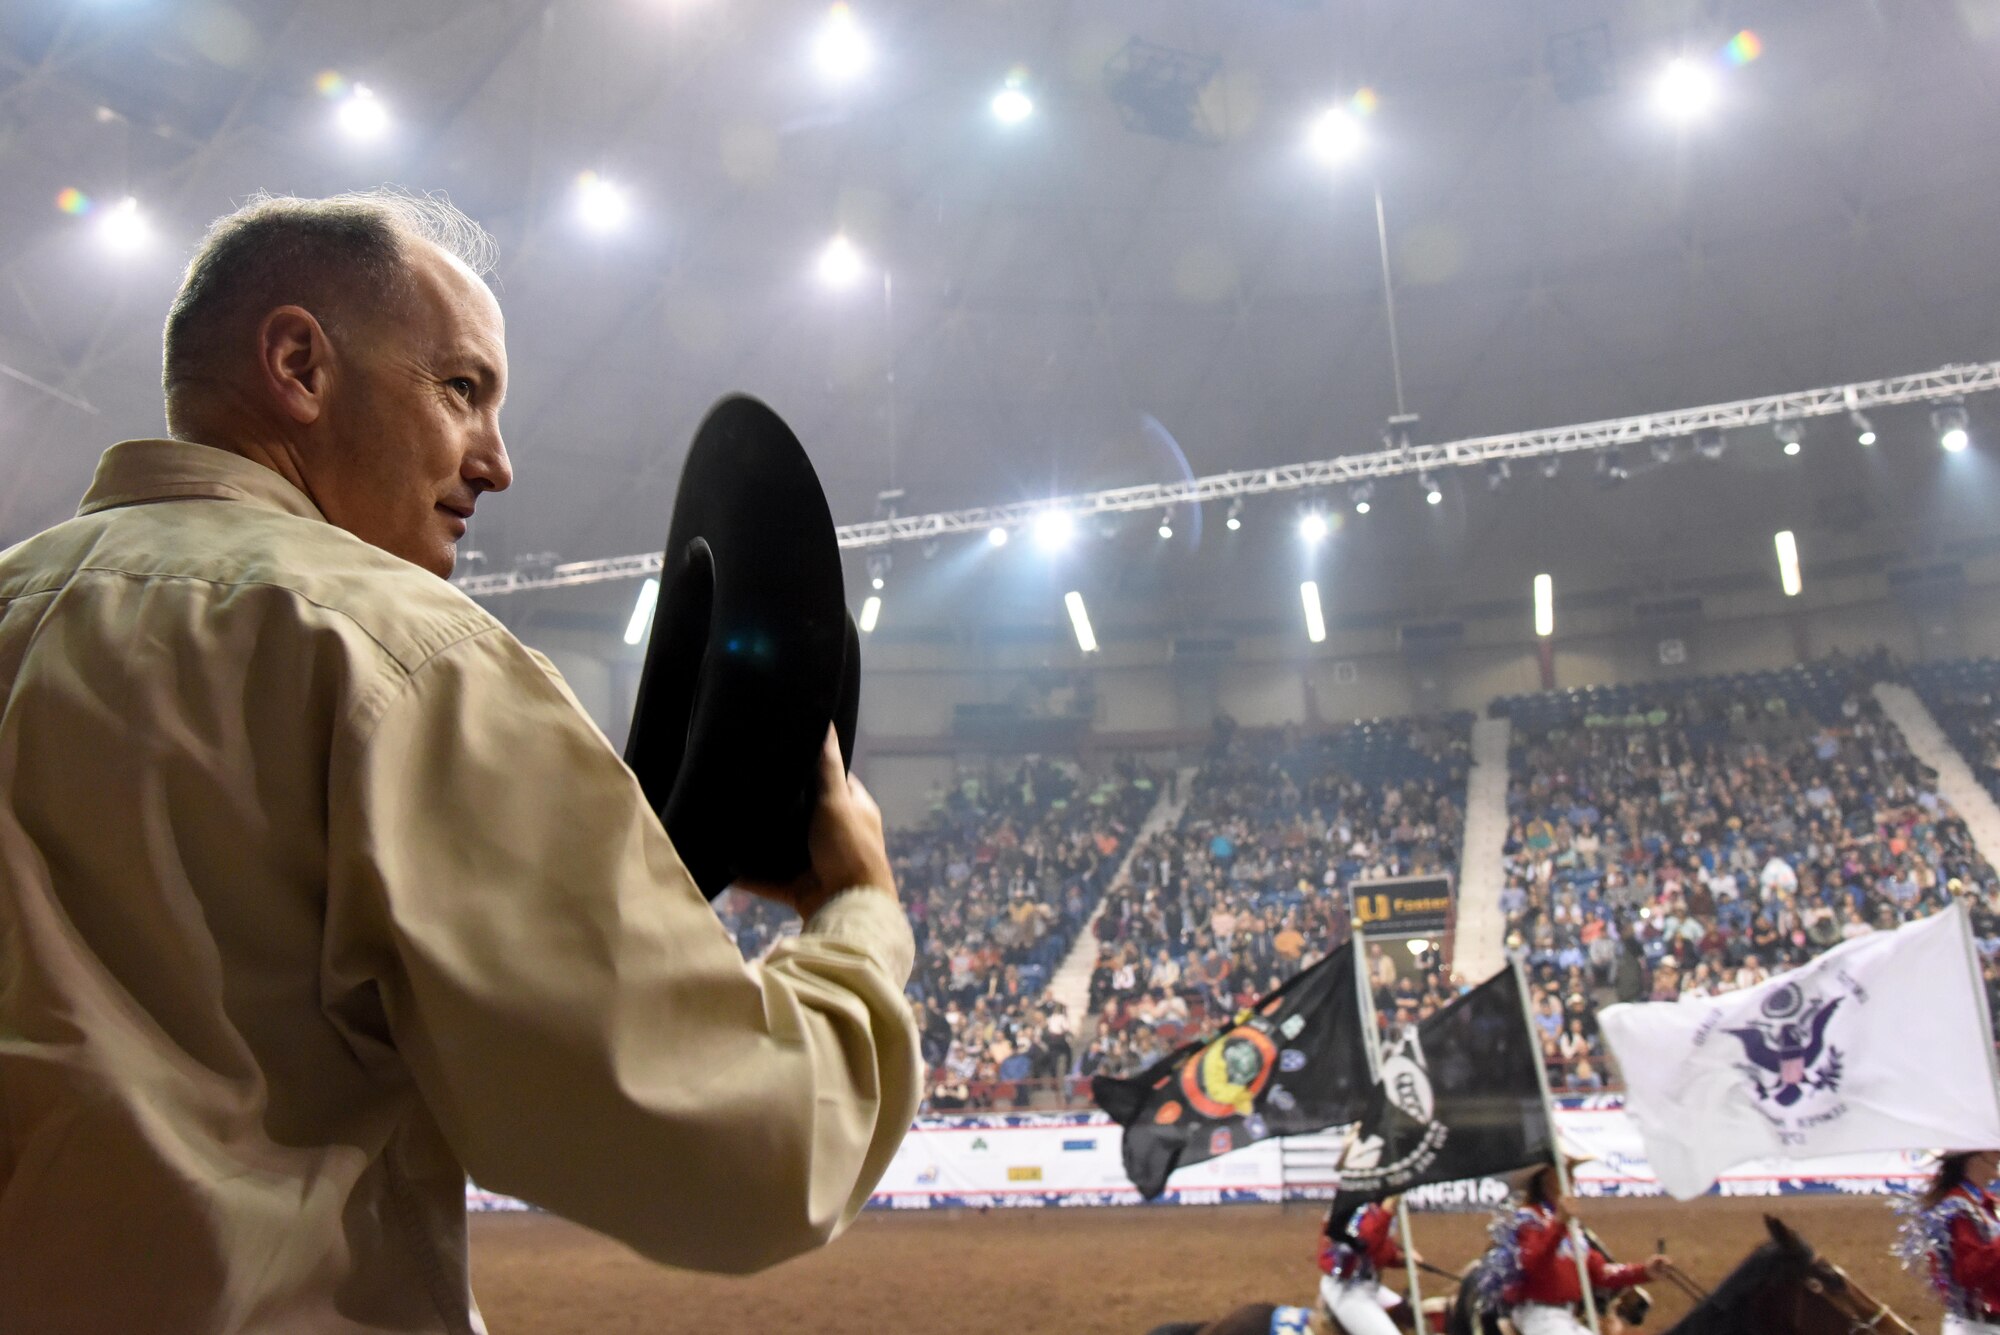 U.S. Air Force Col. Michael Downs, 17th Training Wing Commander, stands for passing of the colors during the 85th Annual San Angelo Stock Show and Rodeo Military Appreciation Night at the Foster Communications Coliseum in San Angelo, Texas, Feb. 15, 2017. The San Angelo Stock Show and Rodeo Ambassadors Drill Team provided a performance with the American flag, service member flags and other patriotic flags. (U.S. Air Force photo by Staff Sgt. Joshua Edwards/Released)